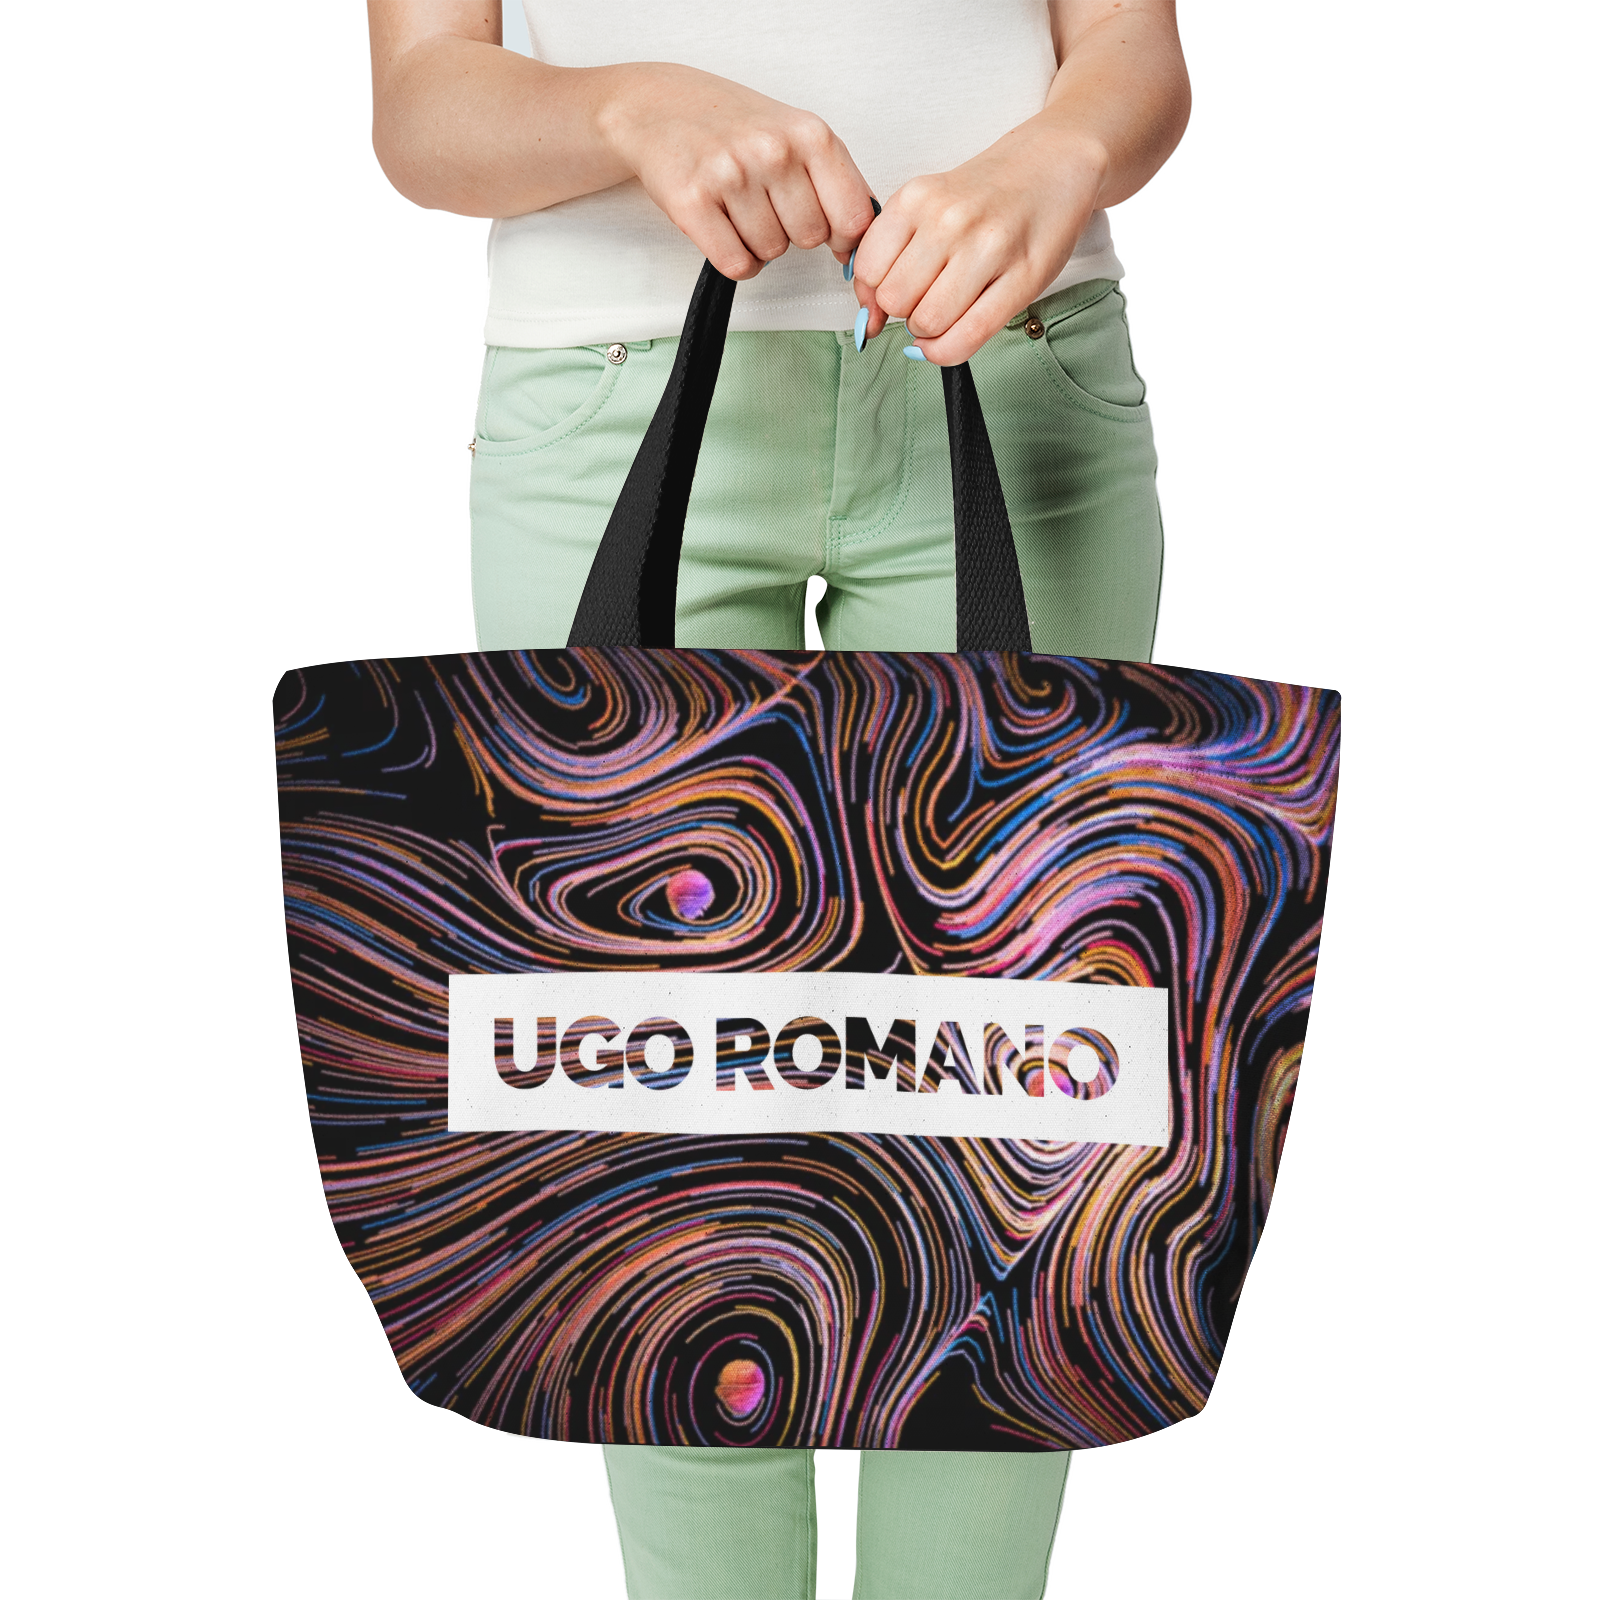 Heavy Duty and Strong Natural Cotton Canvas Tote Bag - UGO ROMANO URTB075